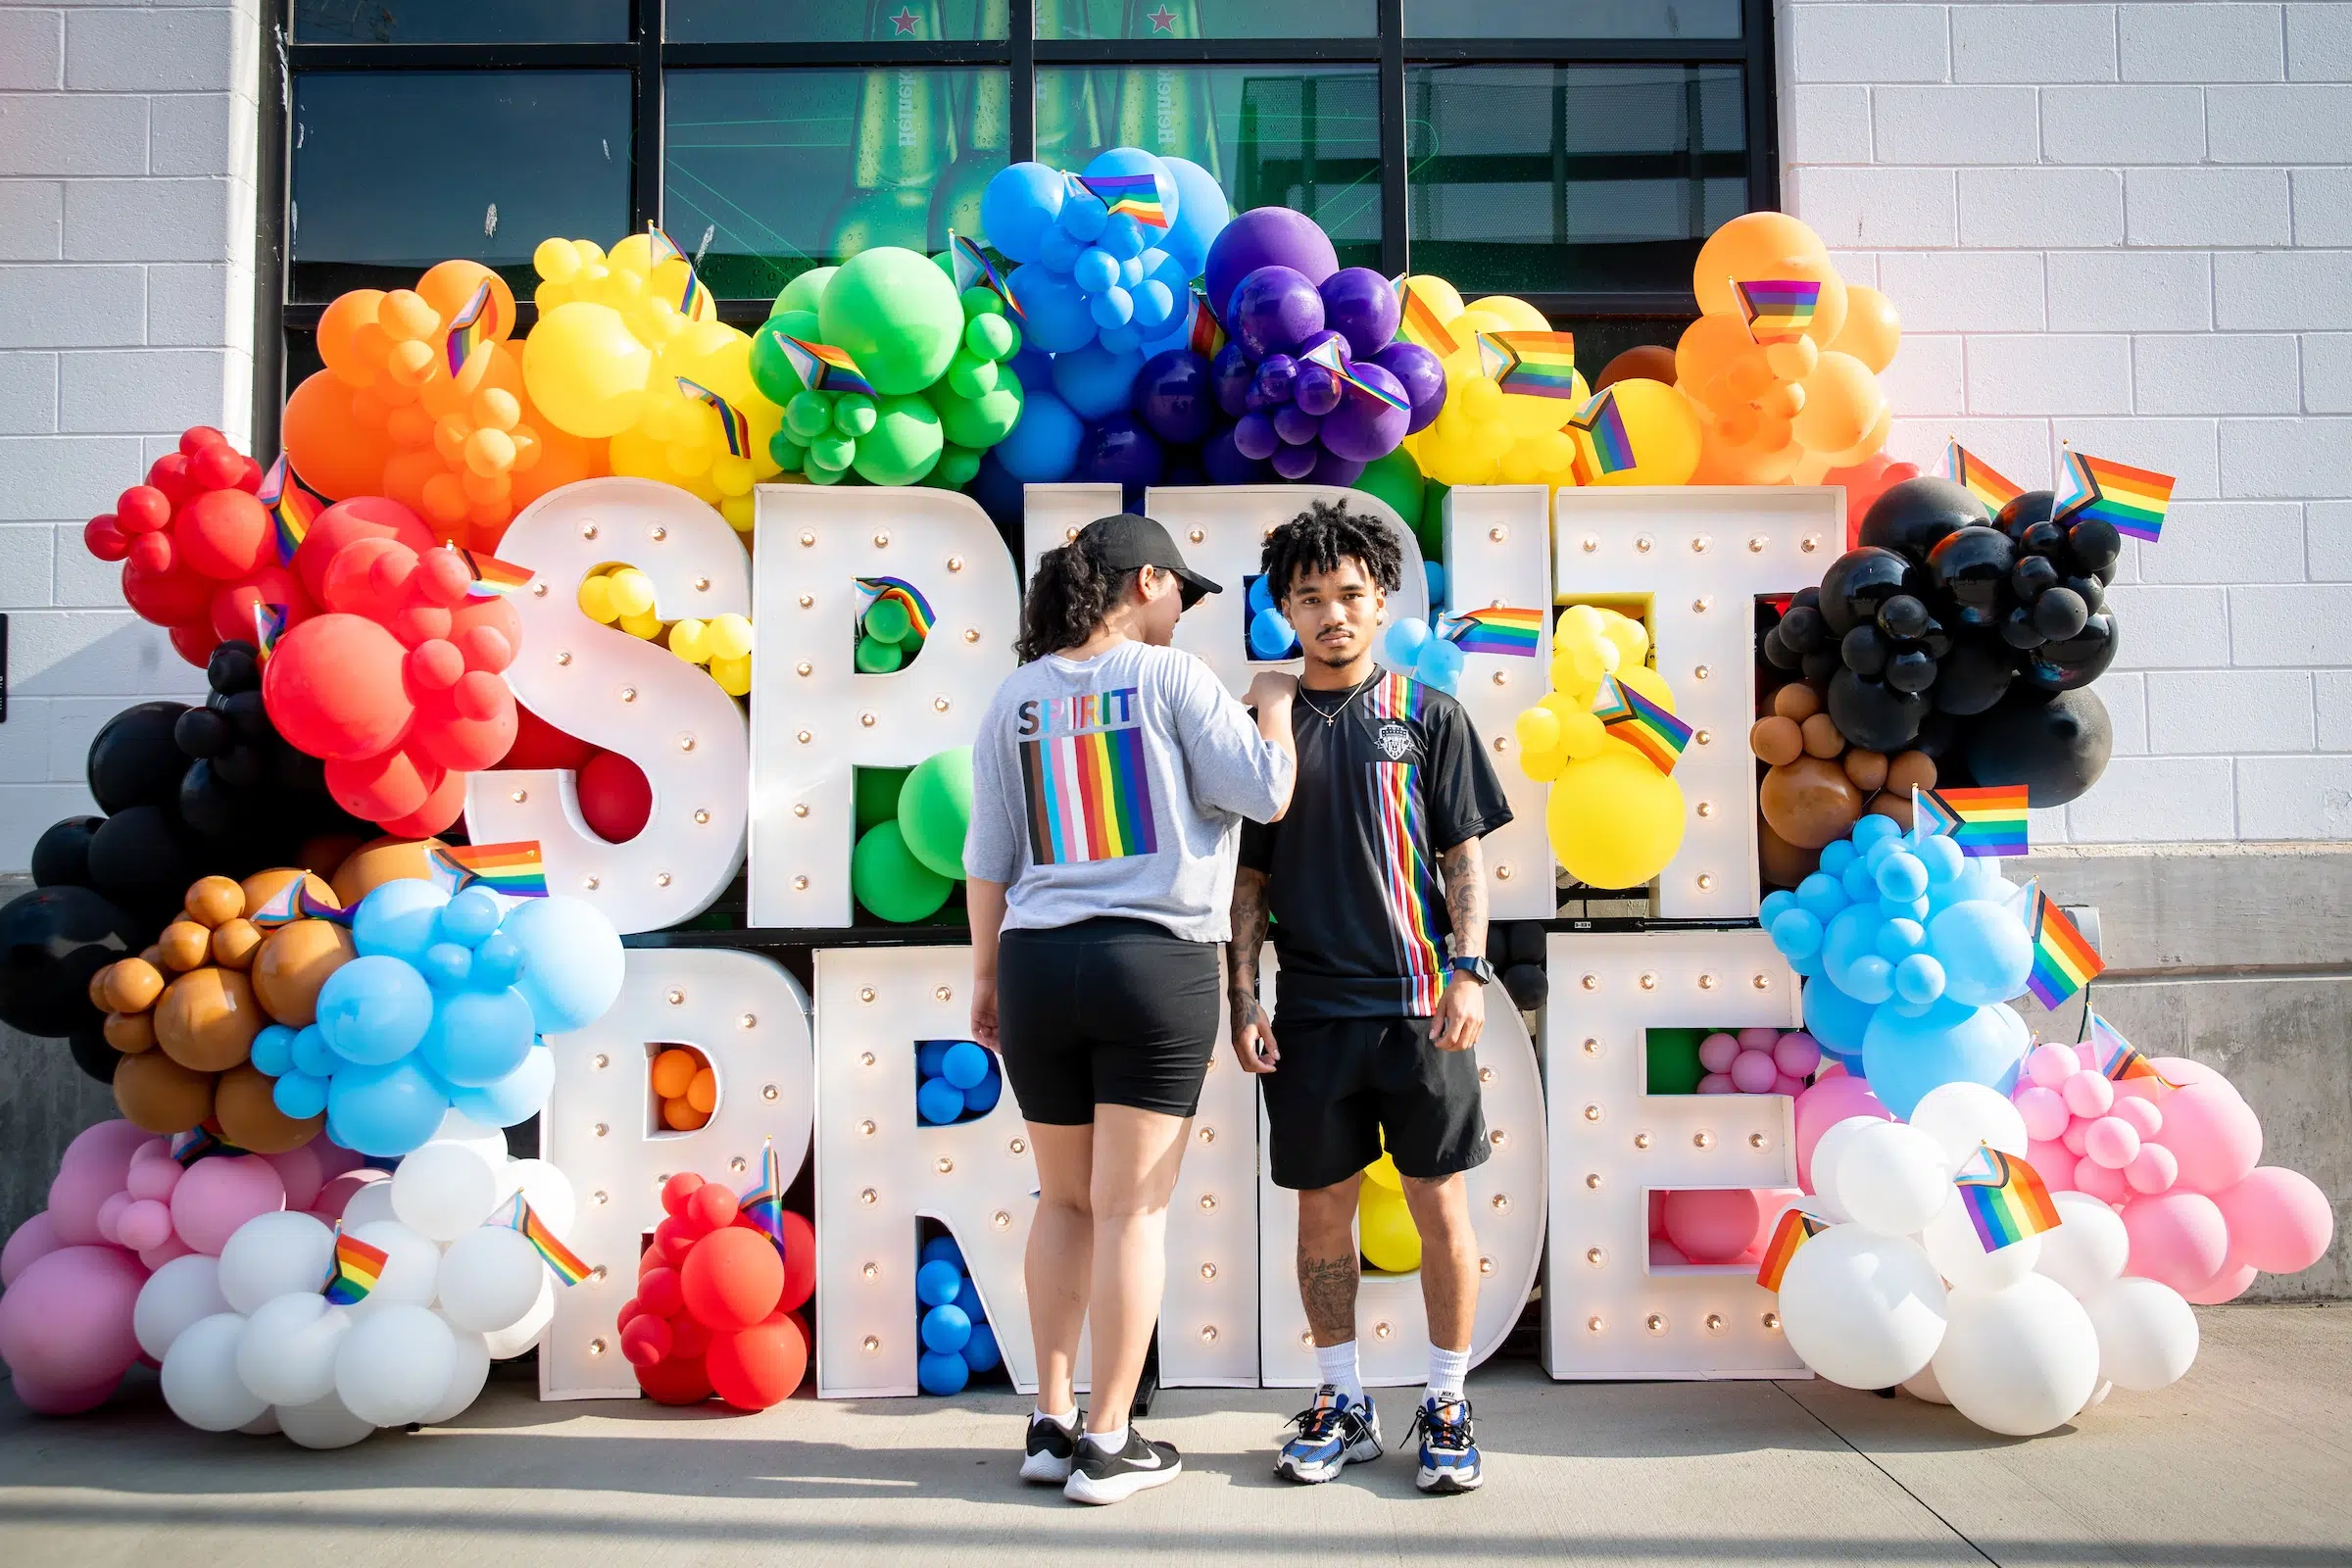 A fan in a gray "Pride" t-shirt and one in a black "Pride" t-shirt pose in front of a rainbow display of balloons and giant white, marquee letters that spell out "SPIRIT PRIDE".